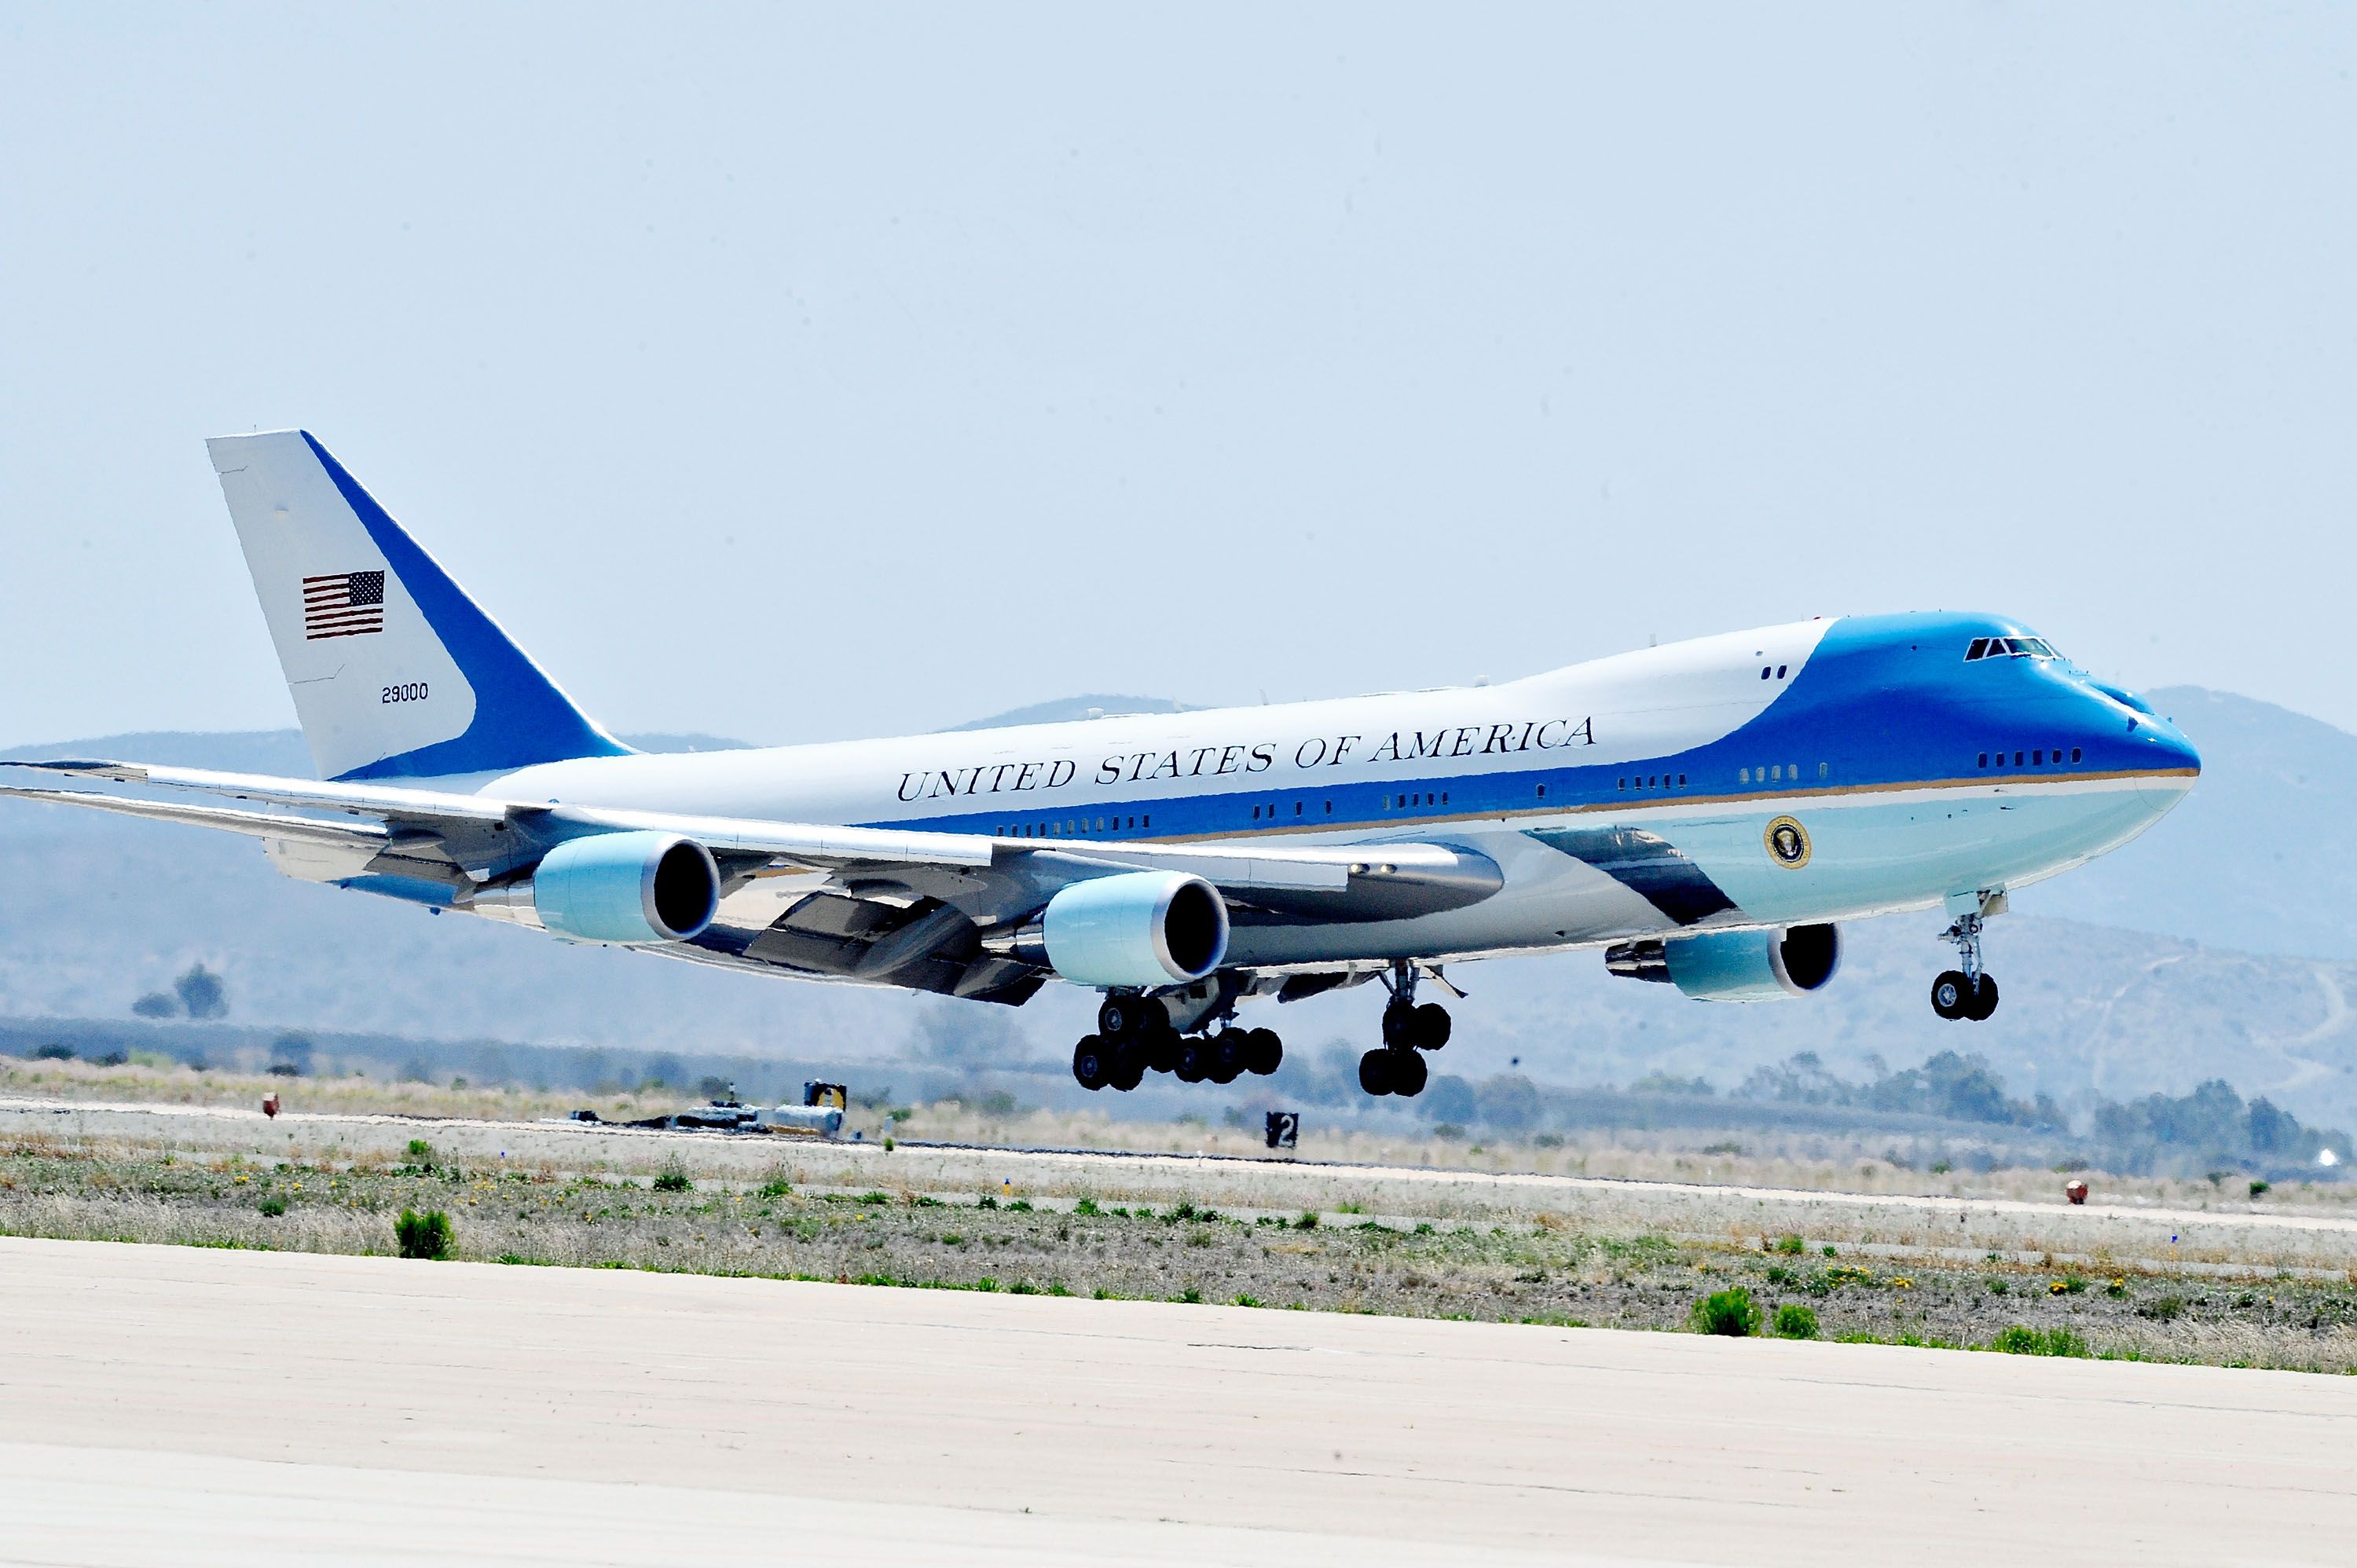 Donald Trump: Here's Why Air Force One Should Cost $4 Billion